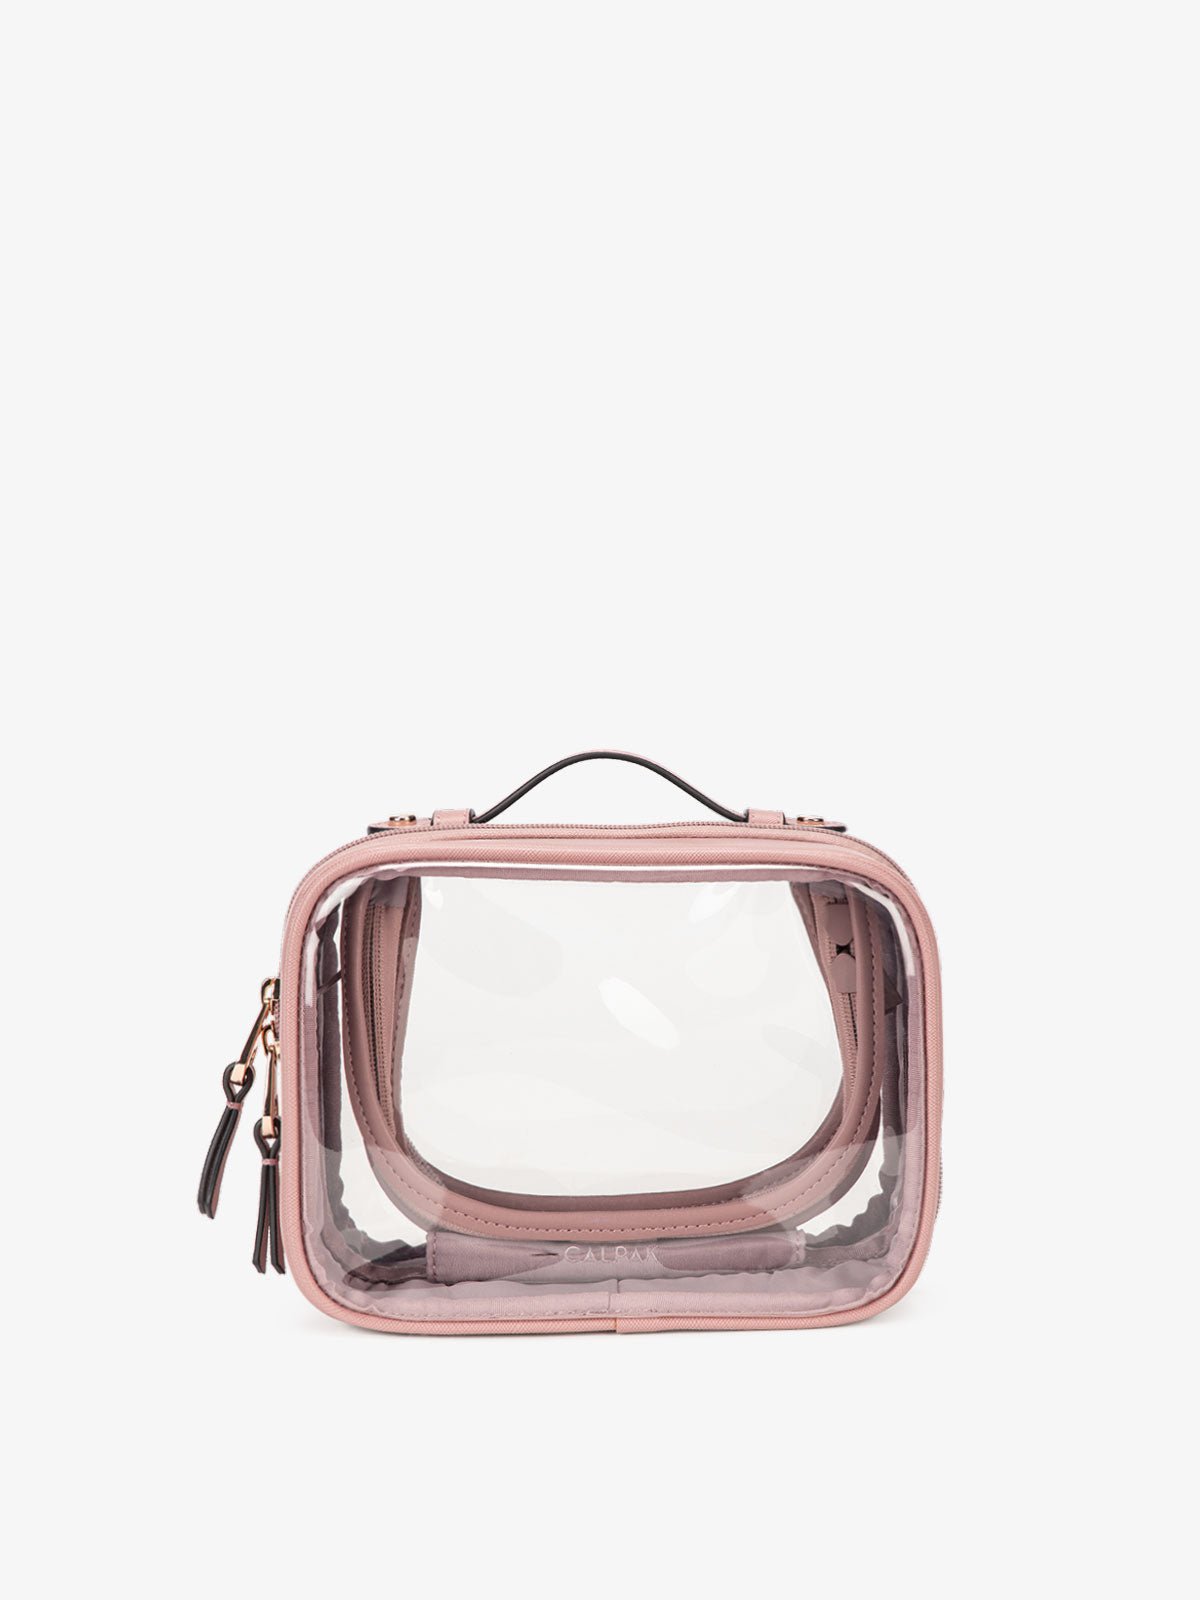 CALPAK small transparent cosmetics case with handles in pink